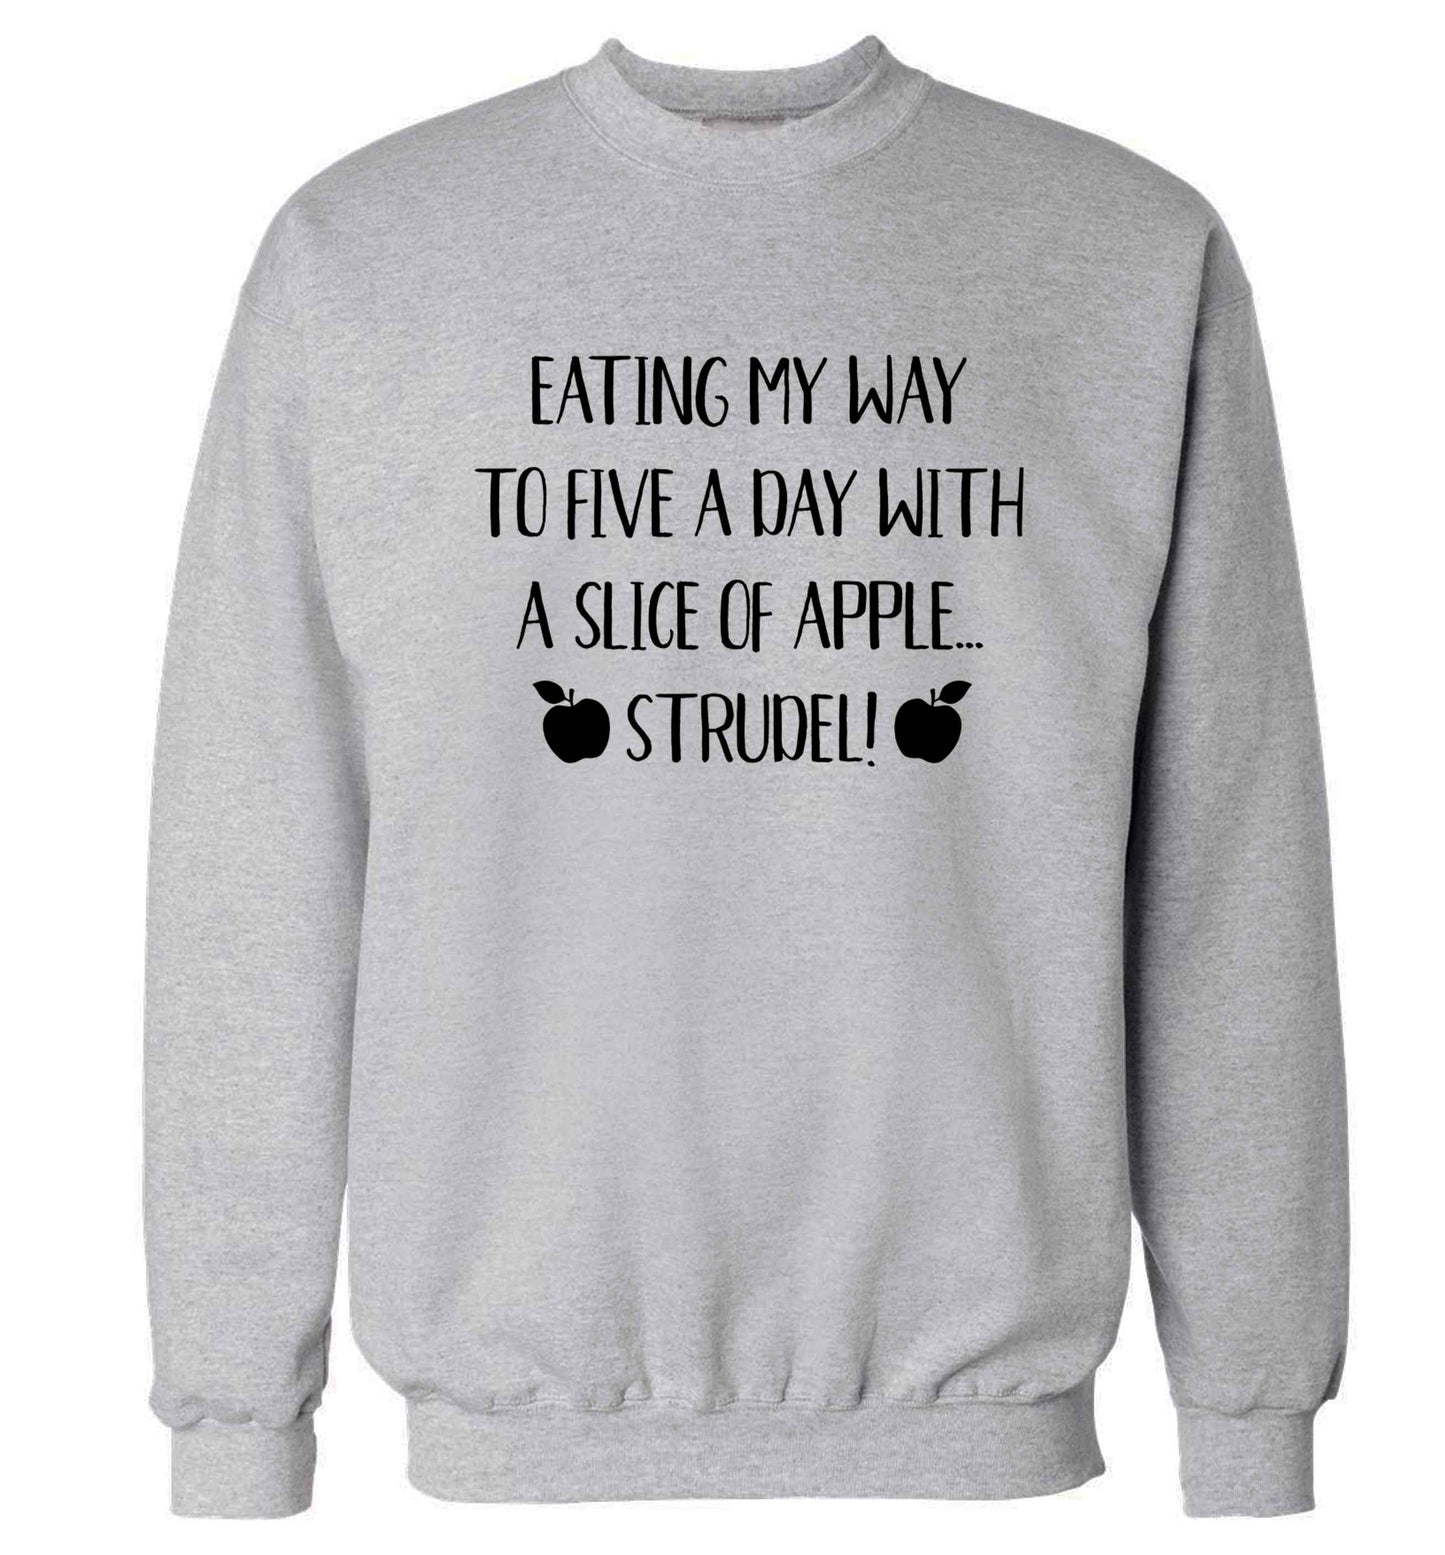 Eating my way to five a day with a slice of apple strudel Adult's unisex grey Sweater 2XL